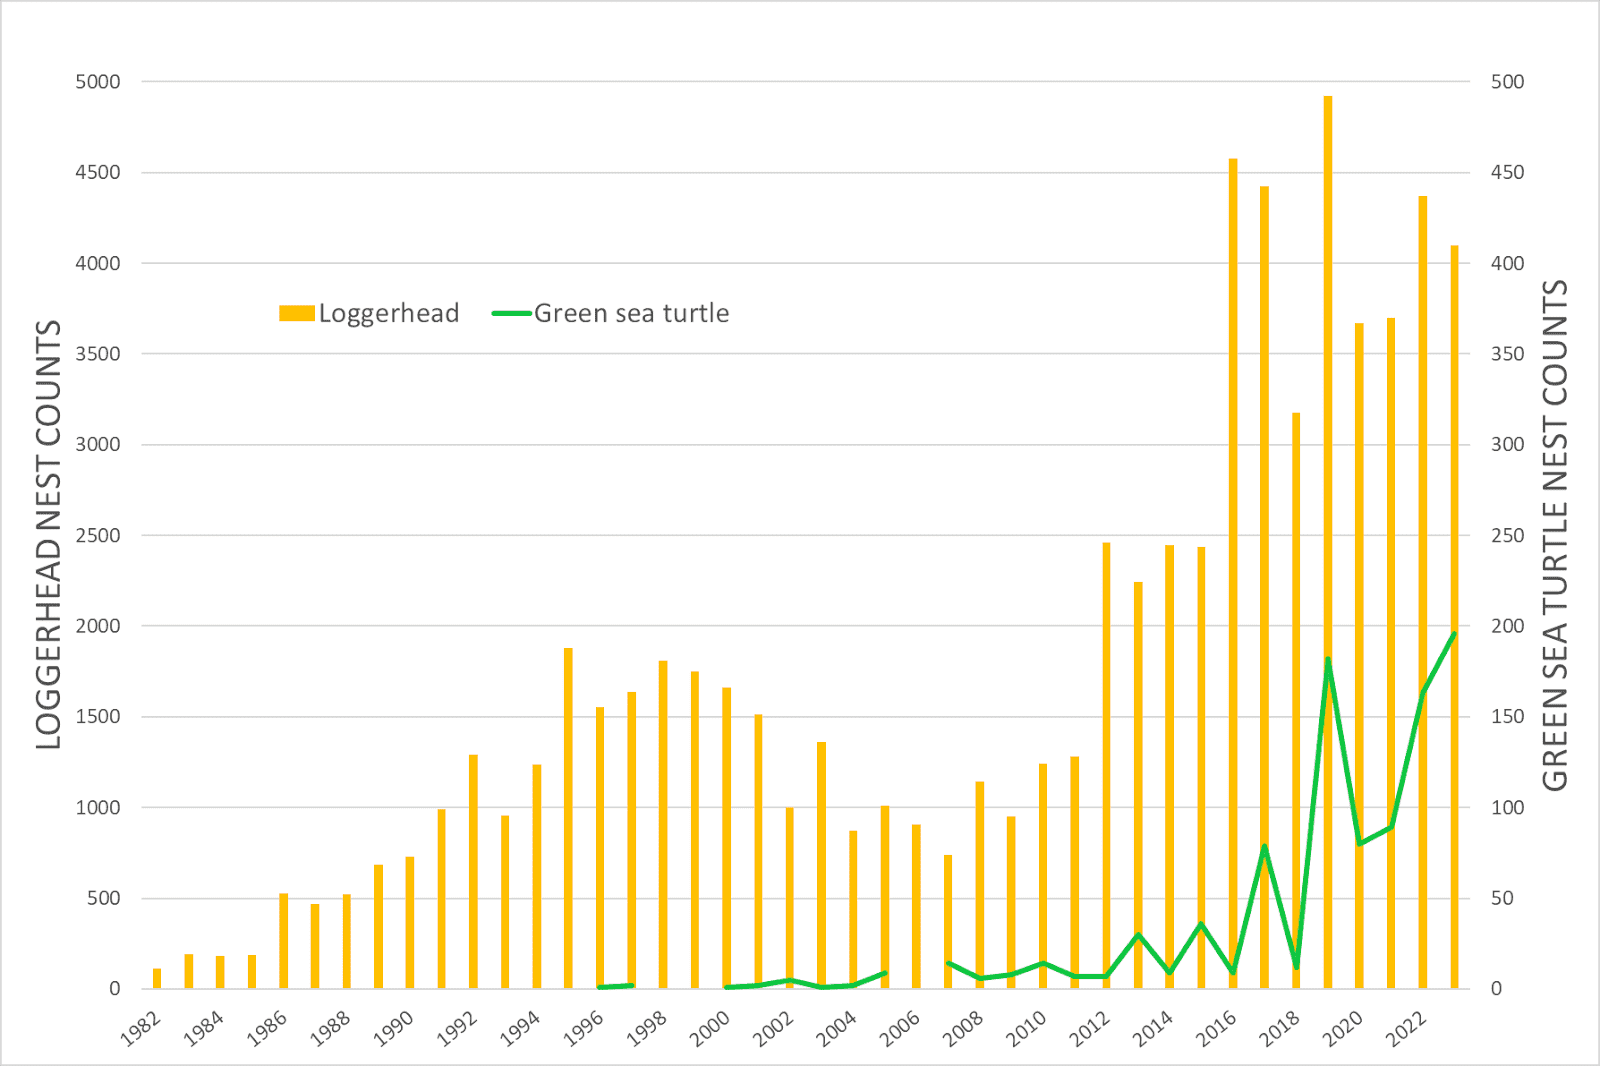 Bar and line graphs showing sea turtle nest counts over time